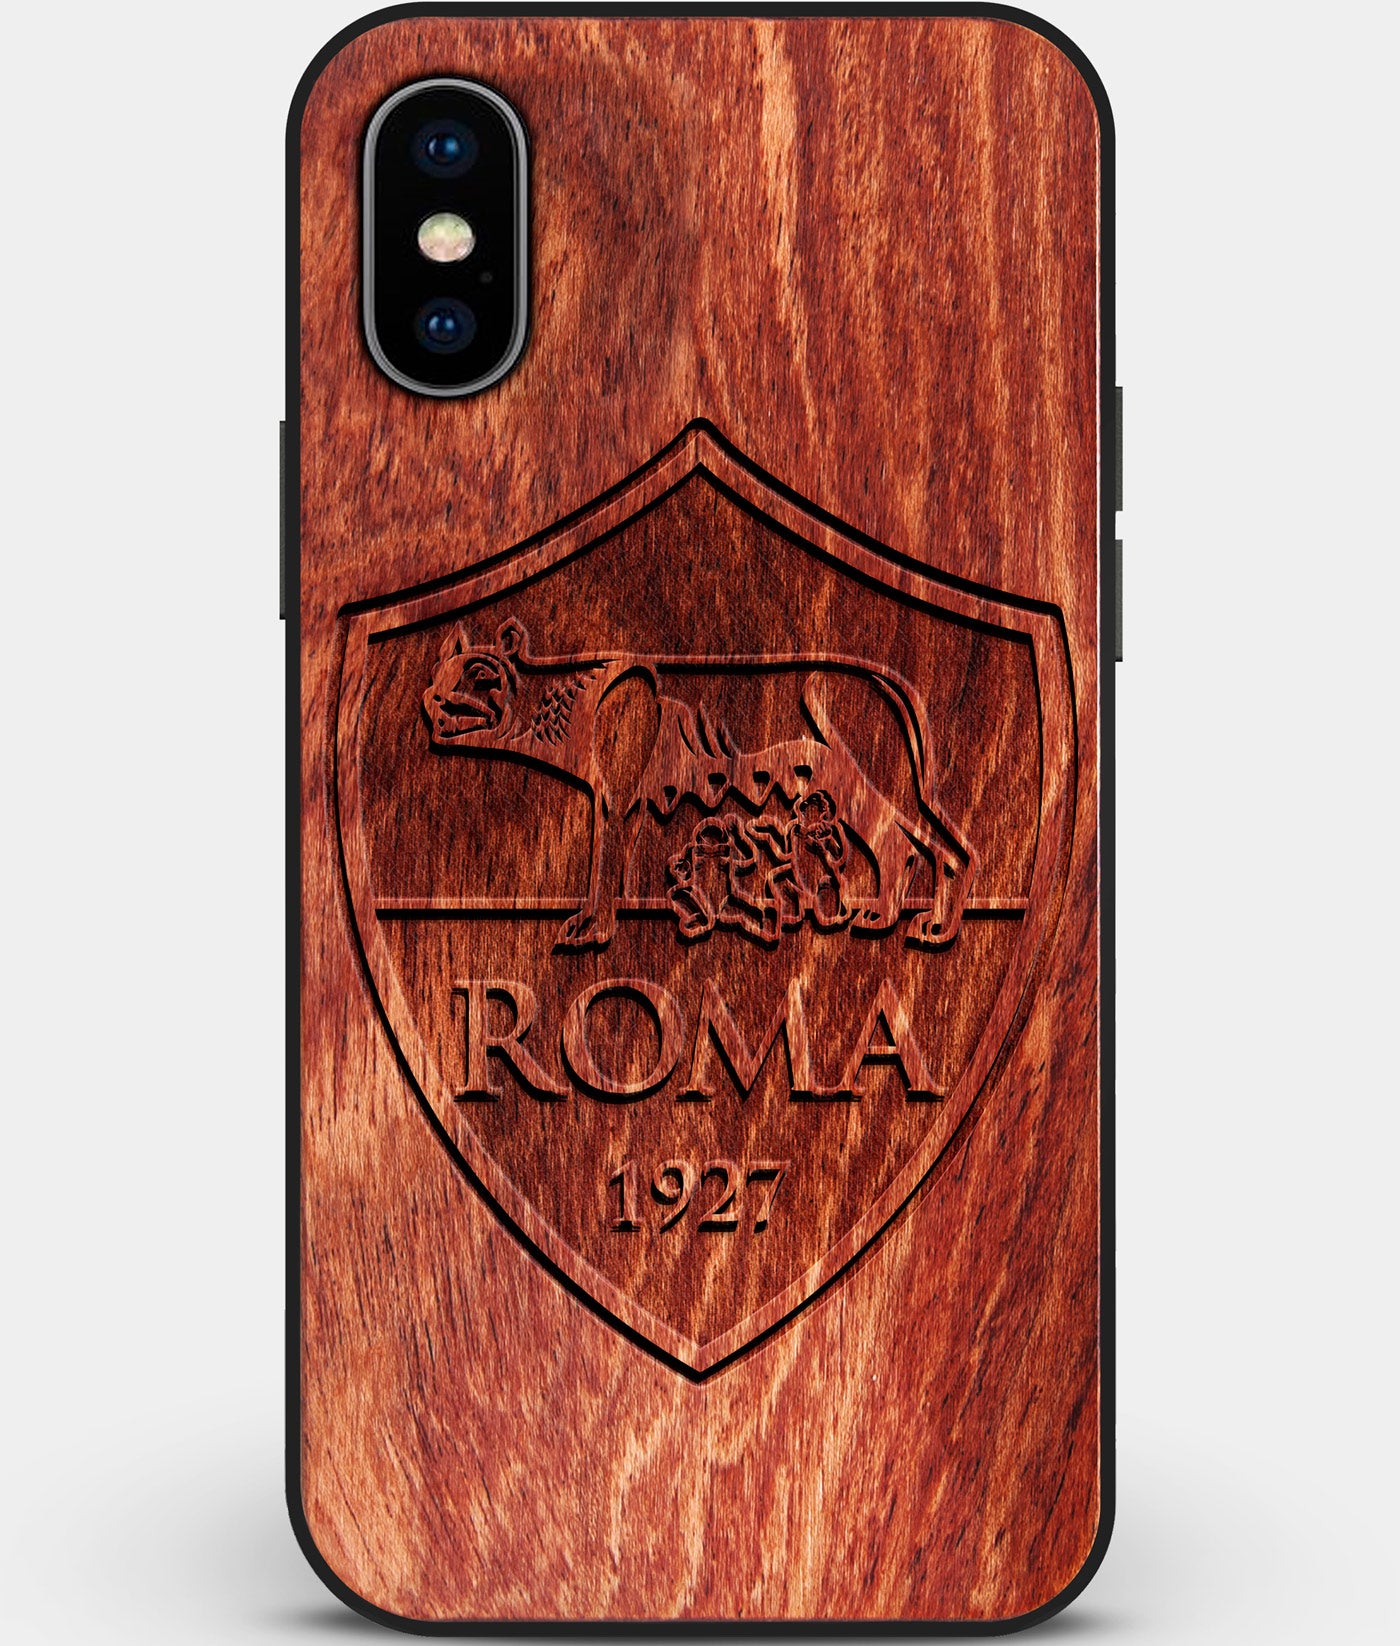 Custom Carved Wood A.S. Roma iPhone X/XS Case | Personalized Mahogany Wood A.S. Roma Cover, Birthday Gift, Gifts For Him, Monogrammed Gift For Fan | by Engraved In Nature